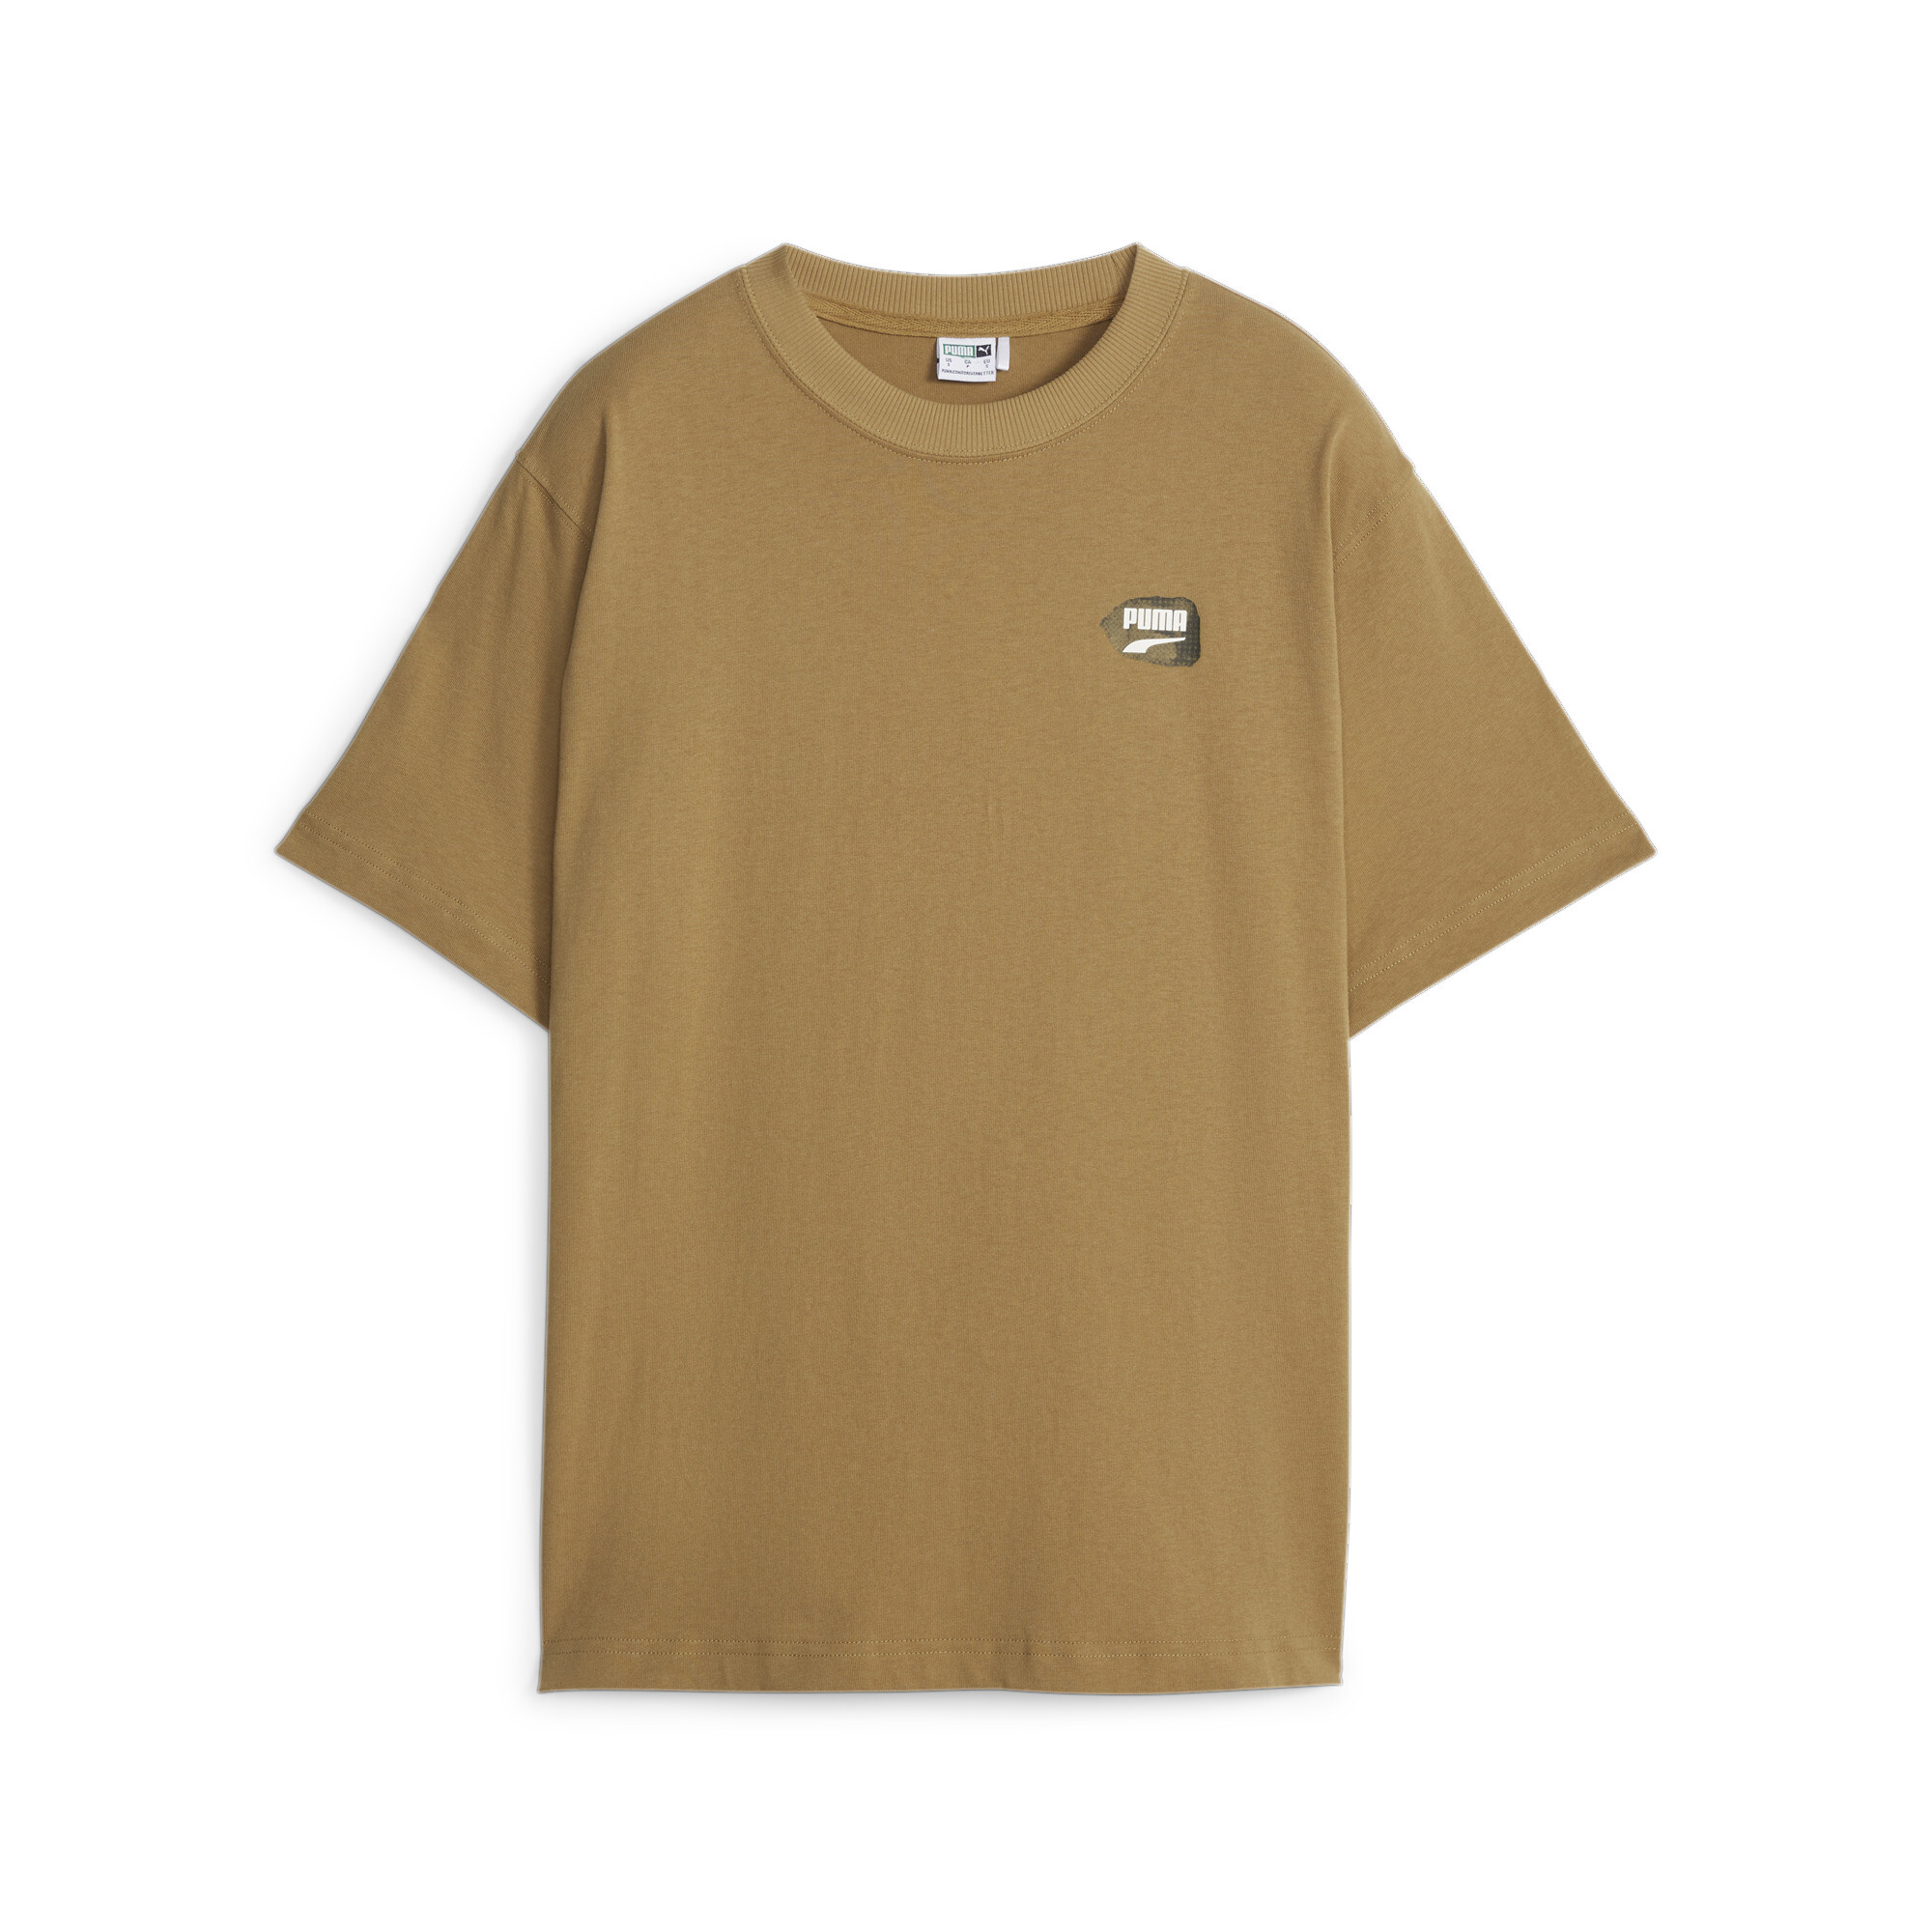 Women's PUMA DOWNTOWN Relaxed Graphic T-Shirt In Beige, Size Large